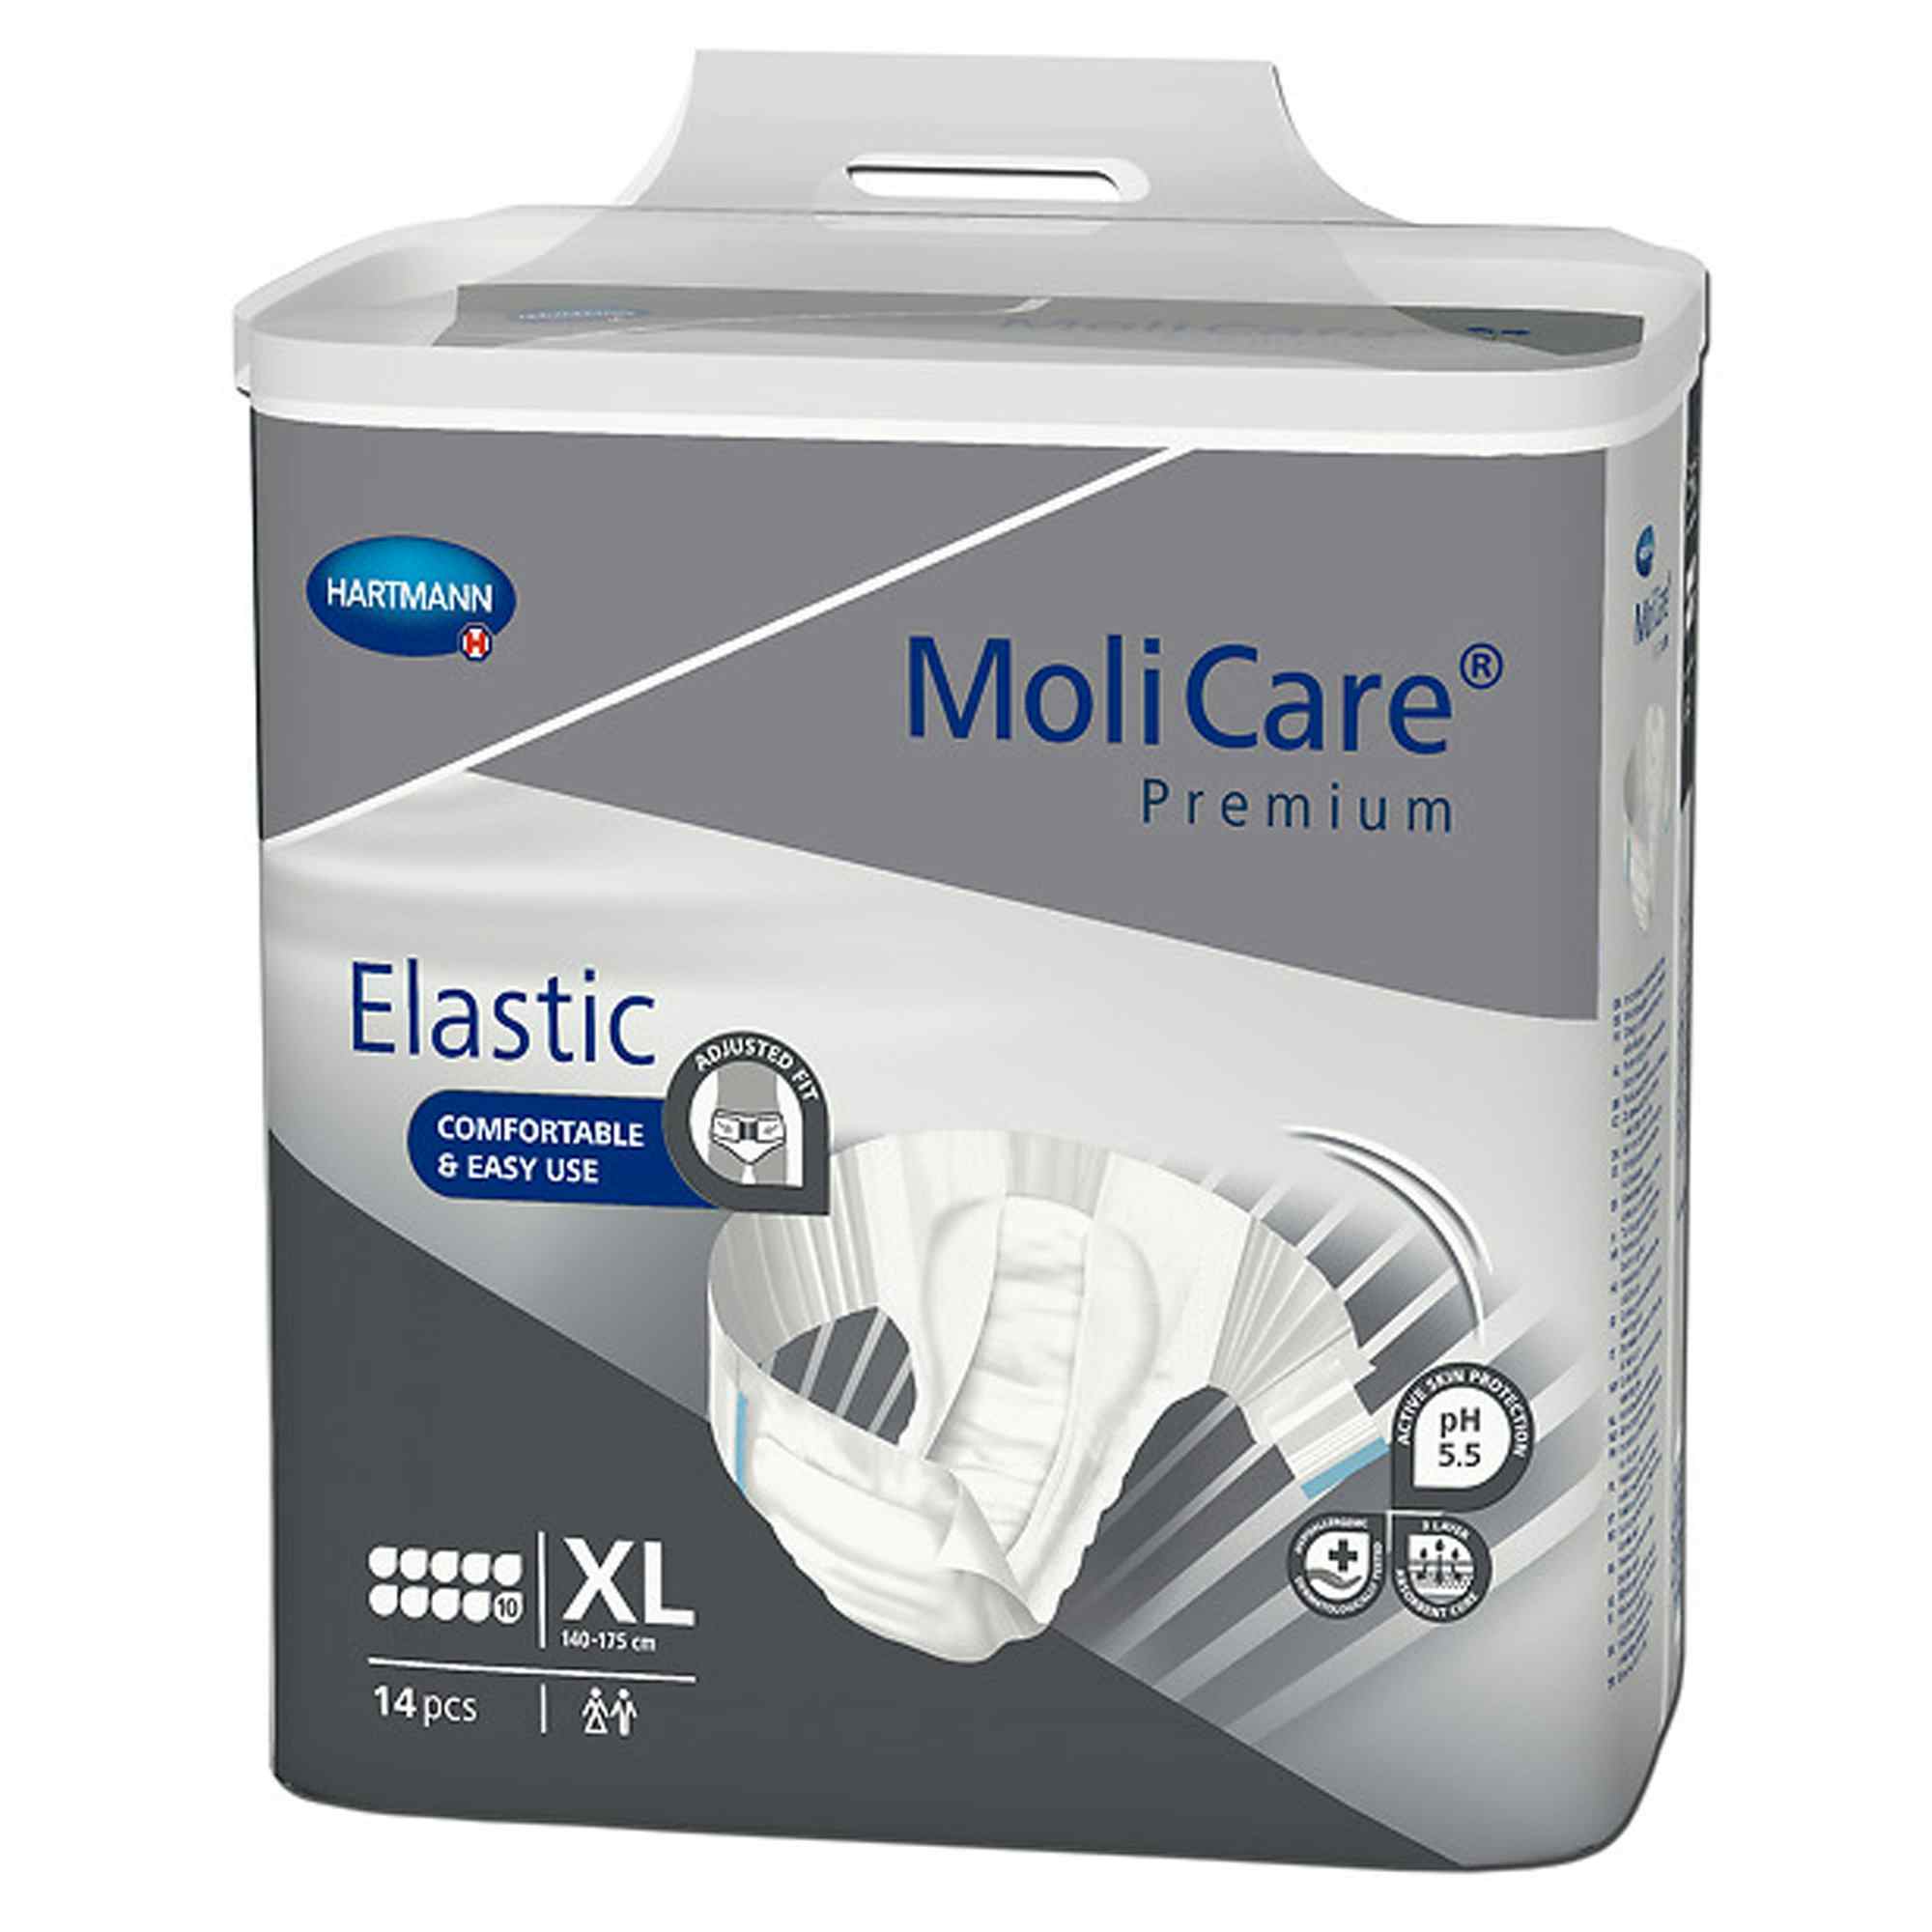 MoliCare Premium 10D Disposable Brief Adult Diapers with Tabs, Heavy Absorbency, 165674, X-Large (57-68") - Pack of 14